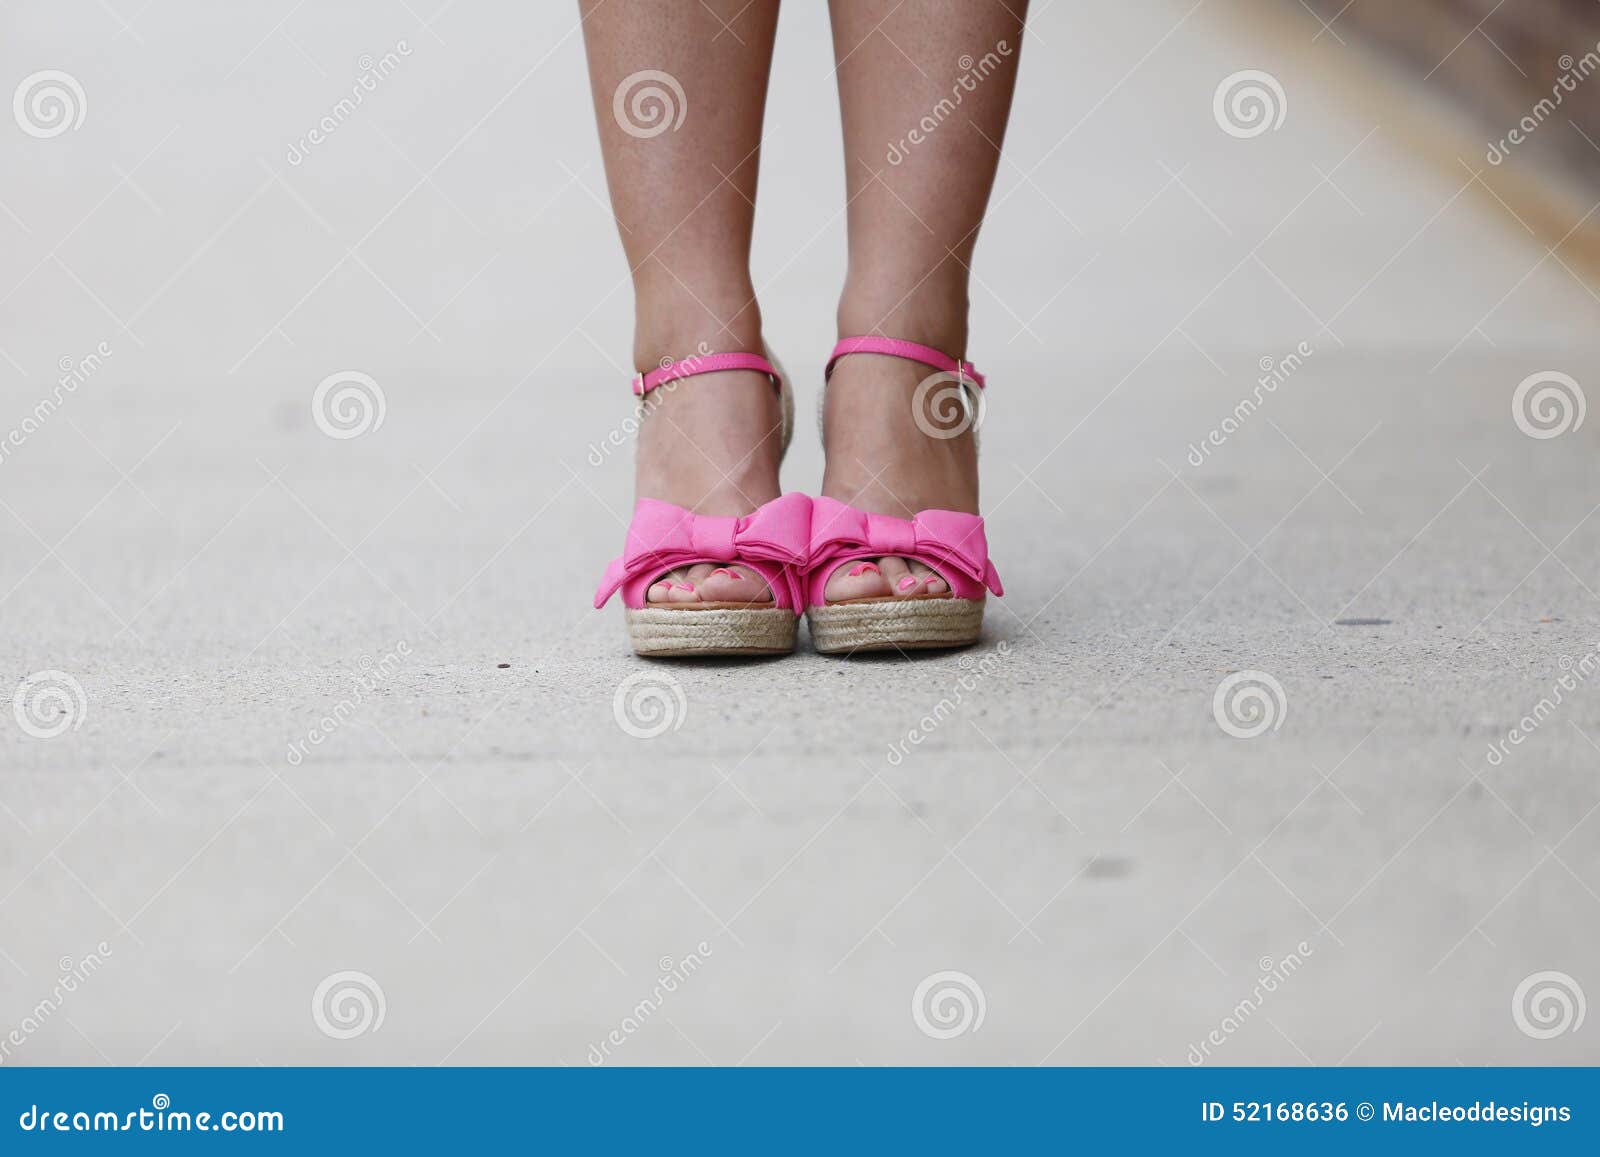 Pink open-toed shoes stock photo. Image of chic, strappy - 52168636